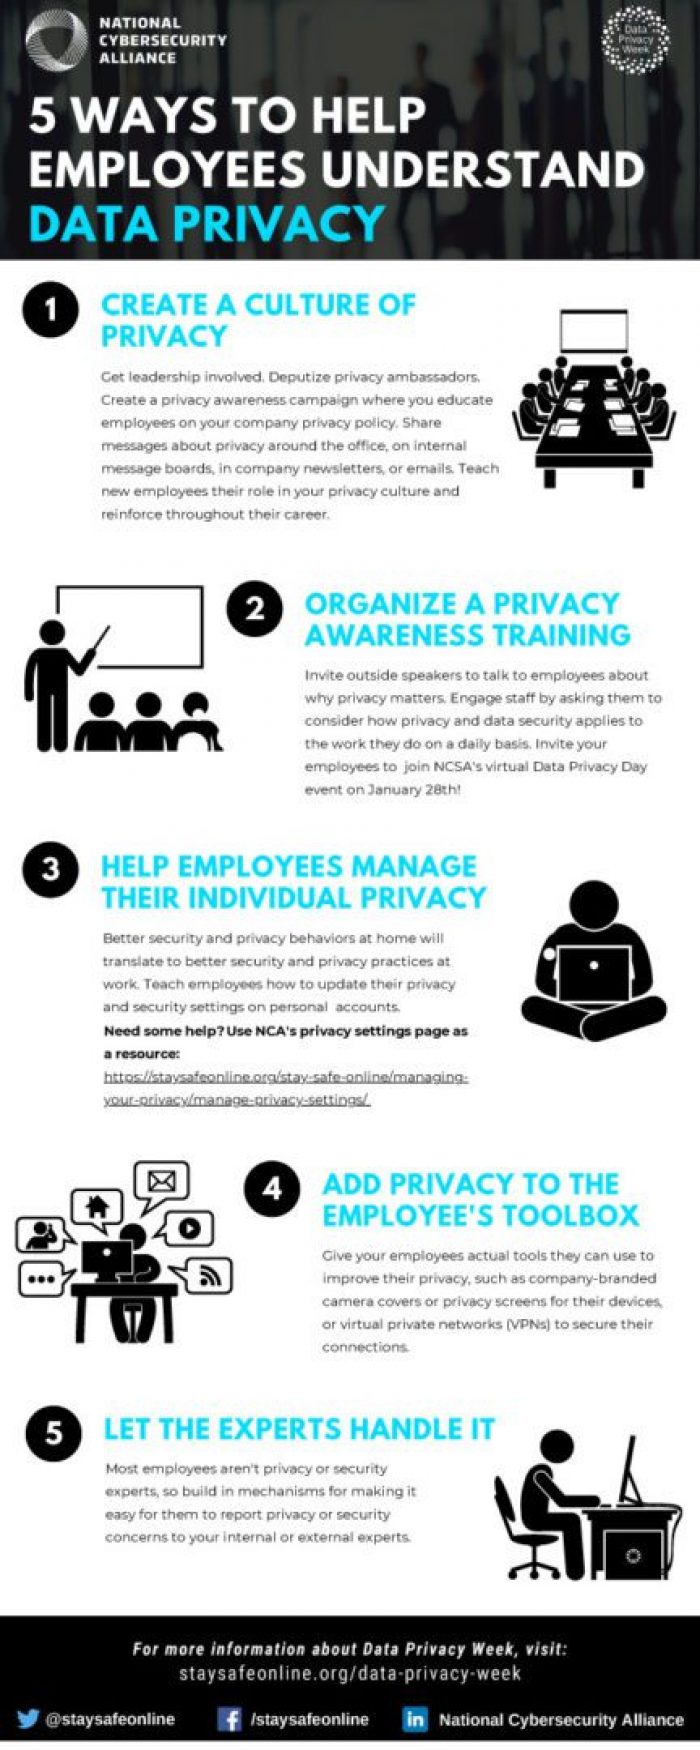 DPW2022-5-Ways-to-Help-Employees-Be-PrivacyAware-1